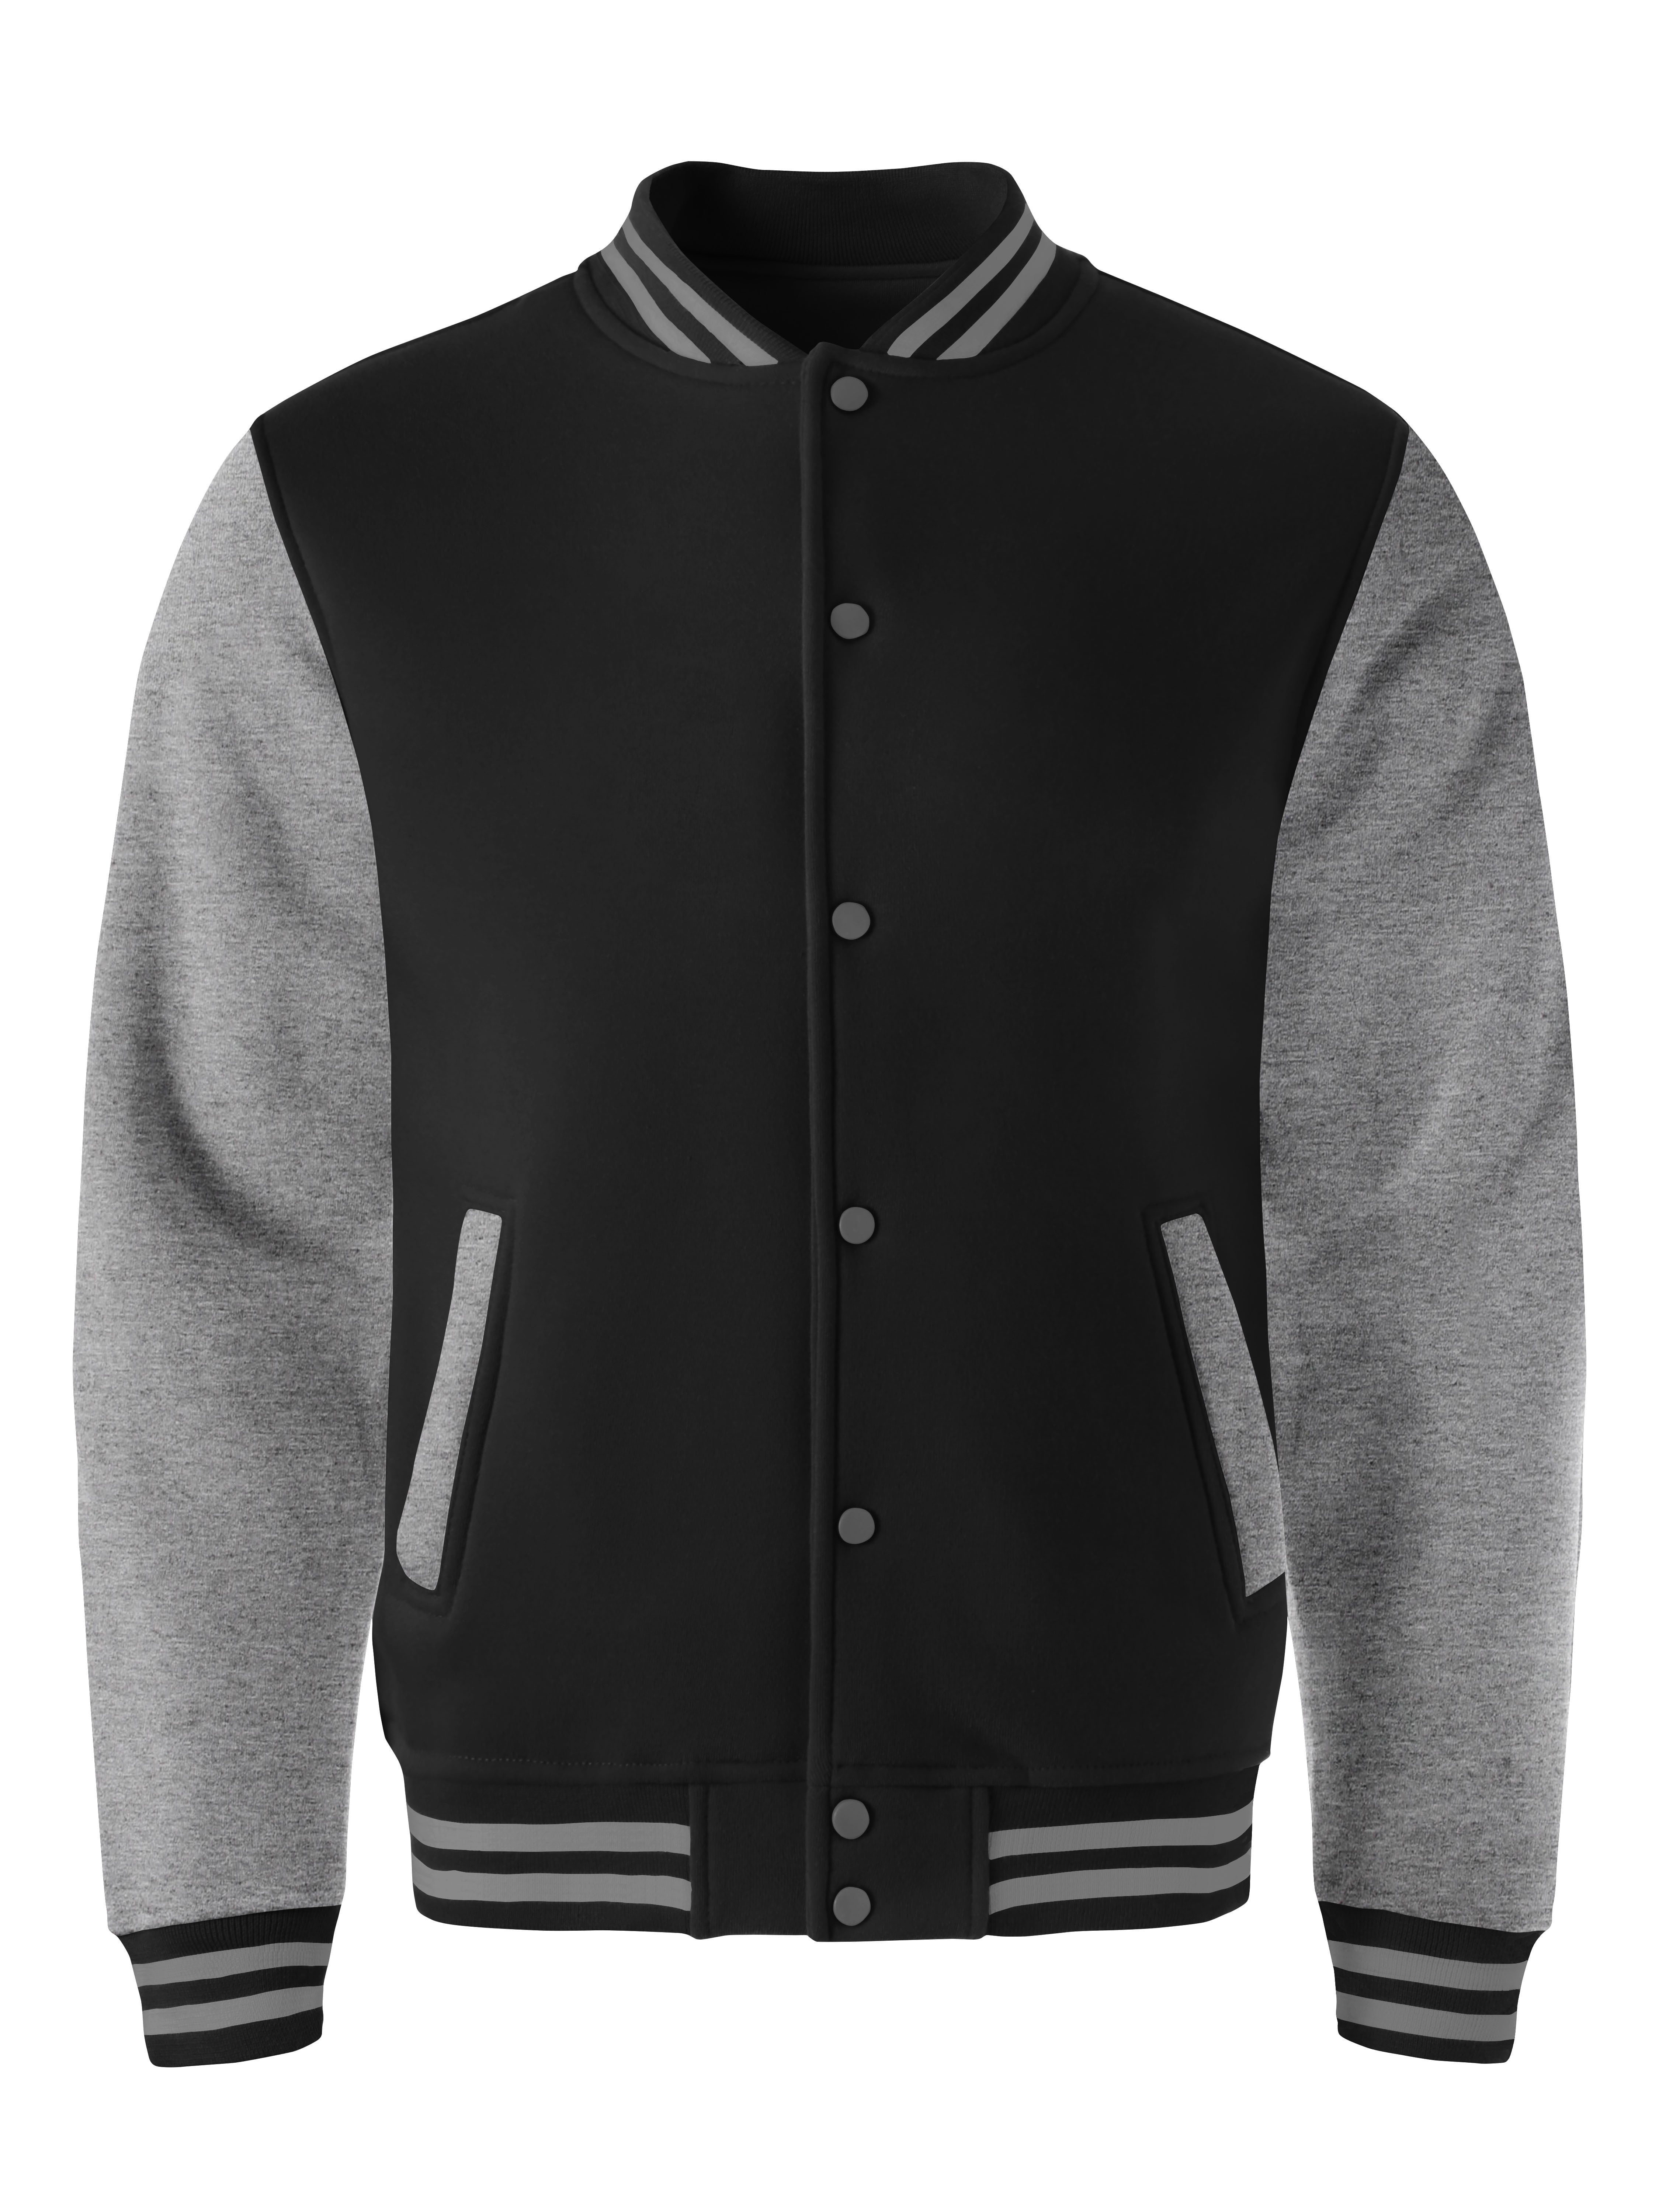 Hat and Beyond Men's Classic Striped Collar Button Down Letterman ...